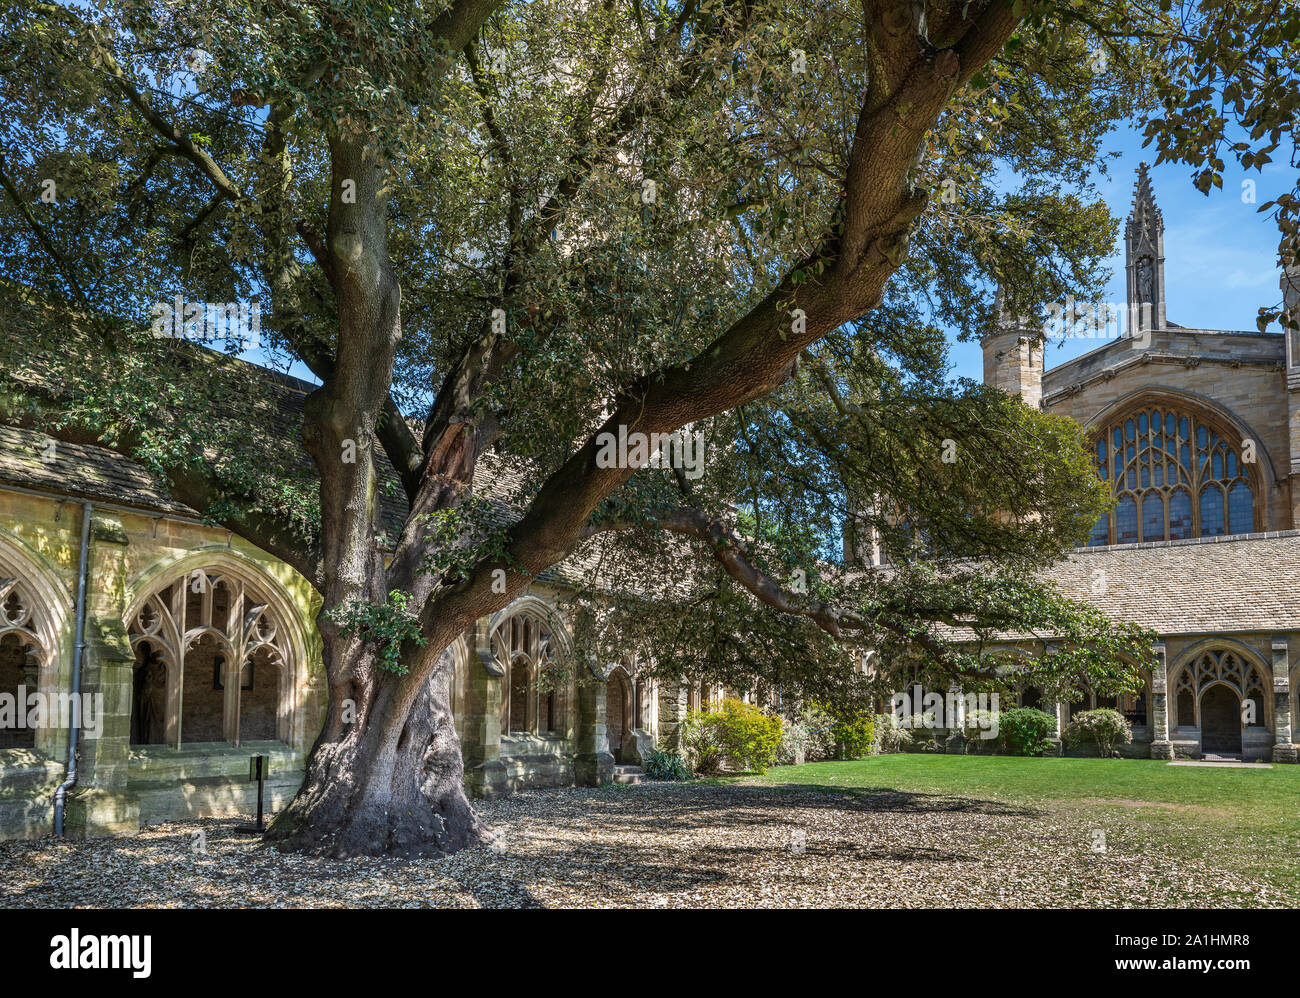 The distinctive tree in the New College Cloisters, used as a location for the famous Harry Potter films. The cloisters are located just off the Front Stock Photo